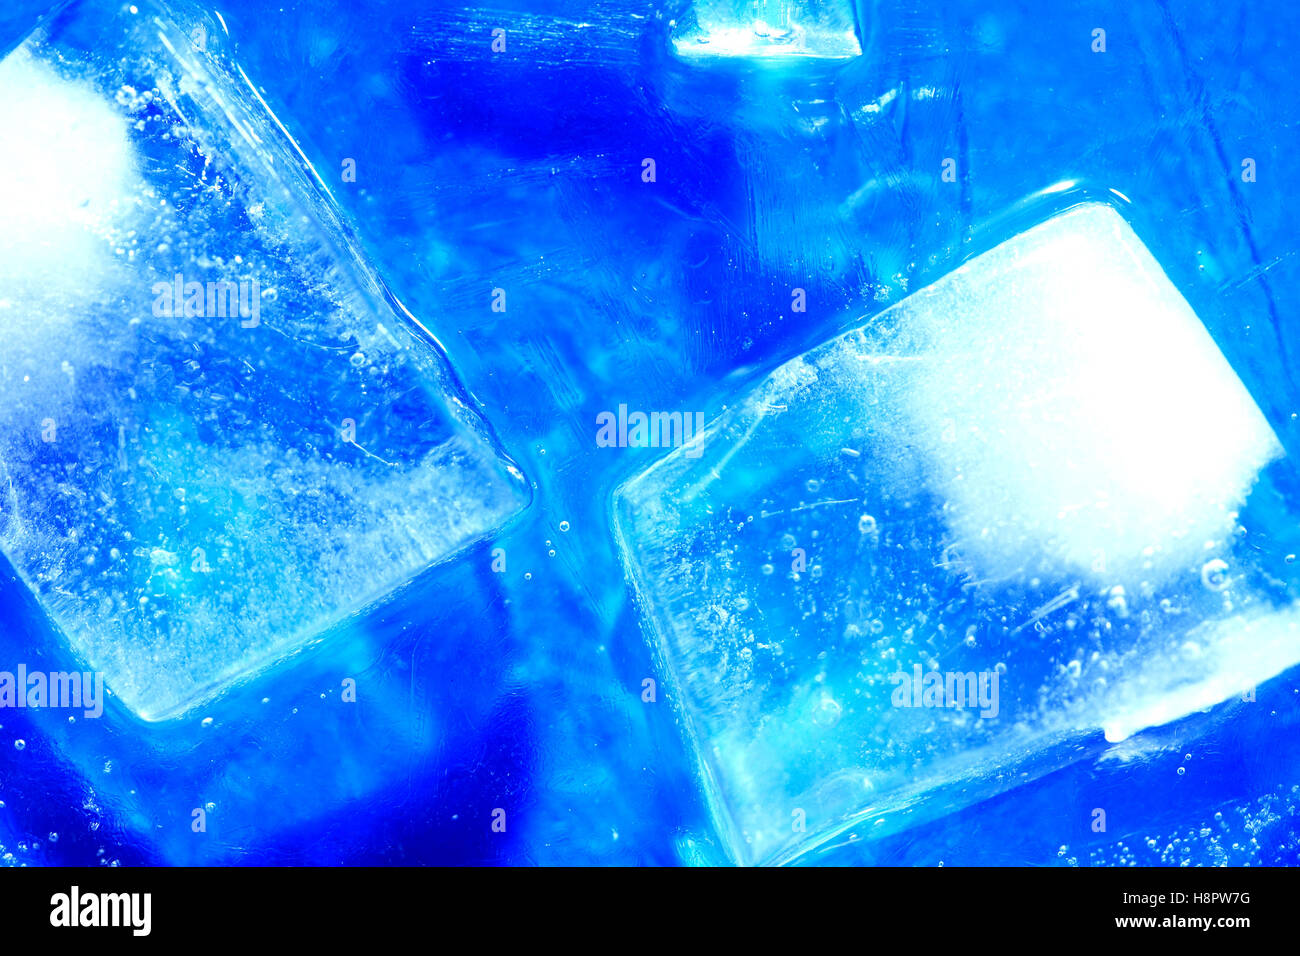 Blue frozen water surface with ice cubes Stock Photo